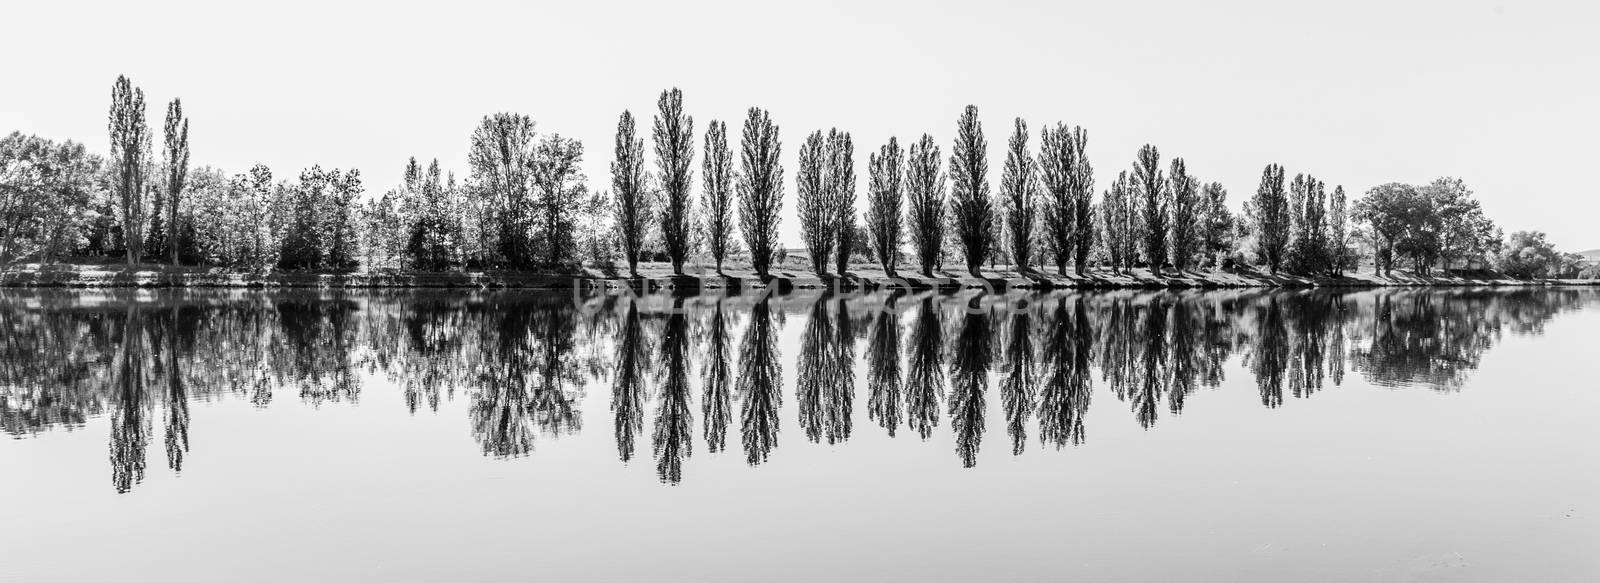 Alley of lush green poplar trees reflected in the water on sunny summer day. Black and white image.